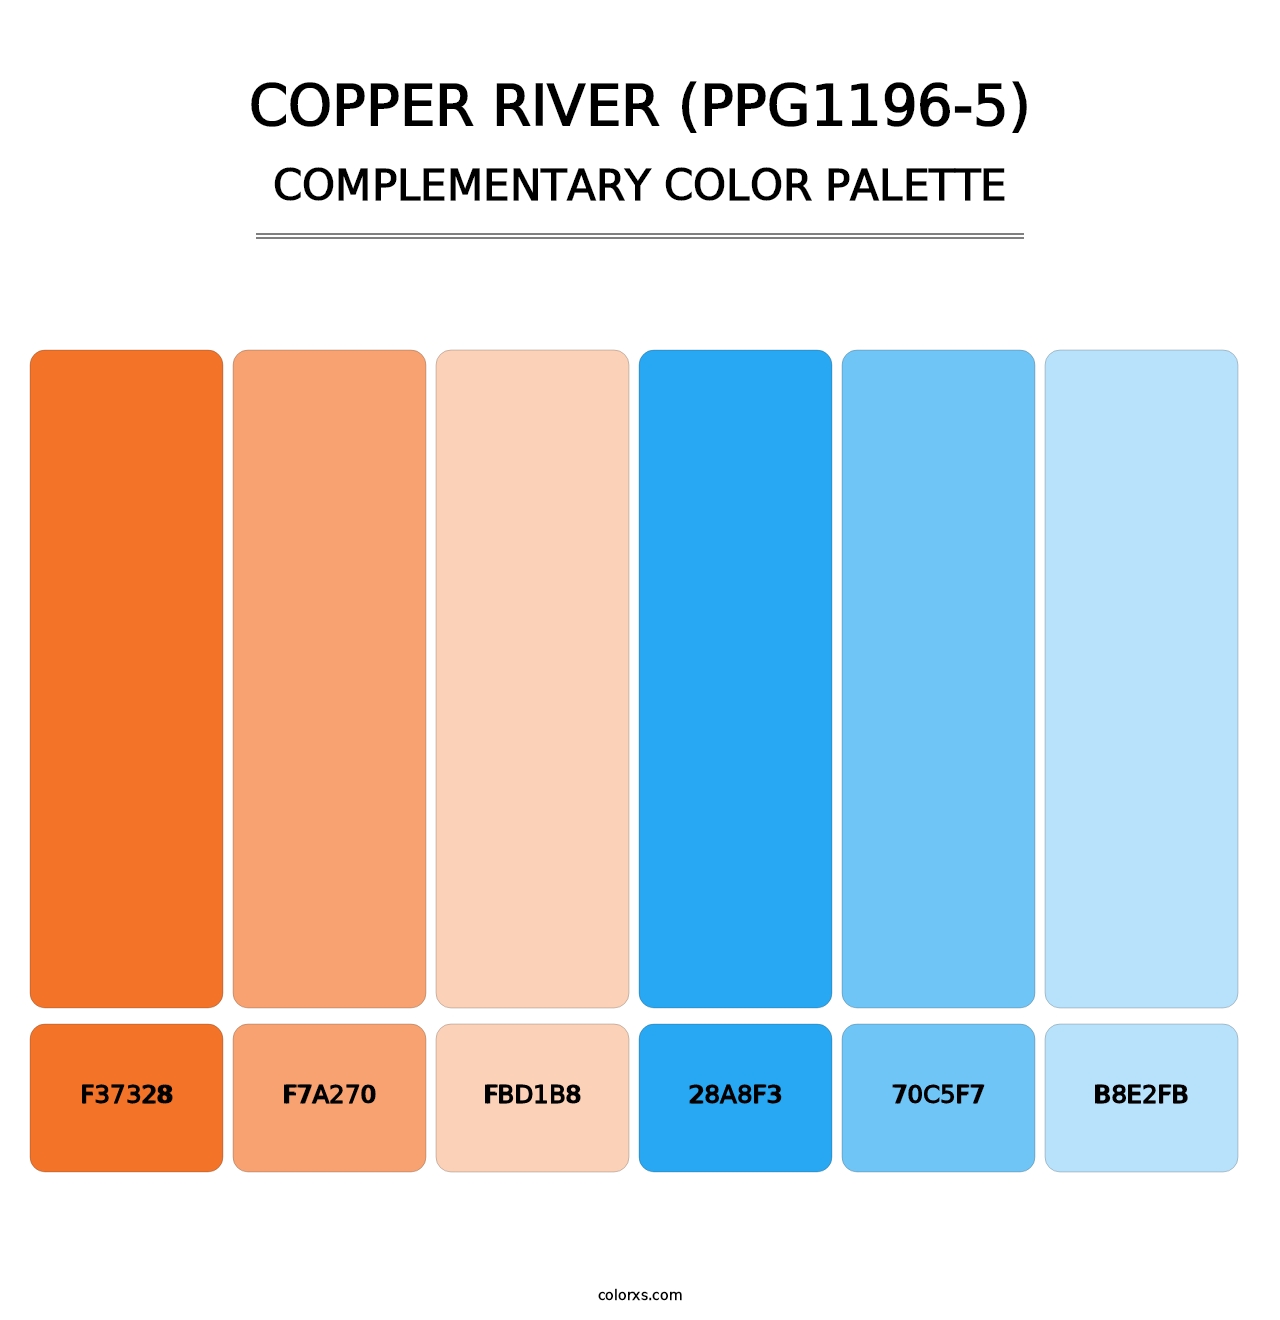 Copper River (PPG1196-5) - Complementary Color Palette